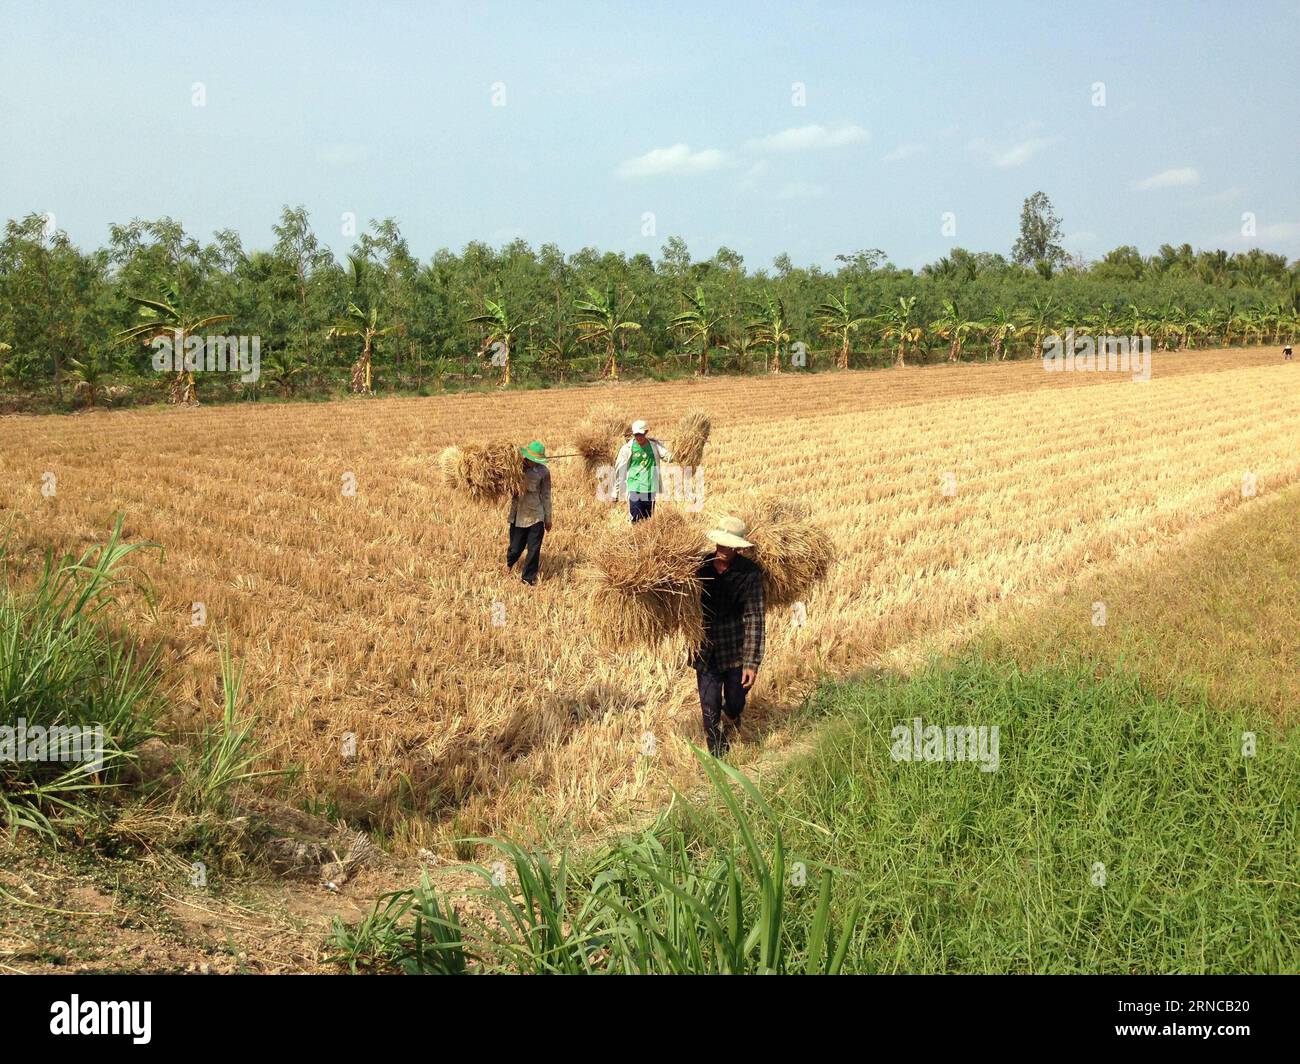 (160402) -- HO CHI MINH CITY, April 2, 2016 -- Local farmers carry withered straw to feed cattle in Ben Tre province, Vietnam, March 29, 2016. Due to the strong influence of the El Nino phenomenon, the Mekong Delta in southern Vietnam has encountered once in a century drought since the end of 2015 which seriously affected local people s life. Mekong Delta, Vietnam s largest and most fertile plain, has an area of over 40,000 square kilometers and covers 13 provinces and cities. ) VIETNAM-MEKONG DELTA-DROUGHT VNA PUBLICATIONxNOTxINxCHN   Ho Chi Minh City April 2 2016 Local Farmers Carry Withered Stock Photo